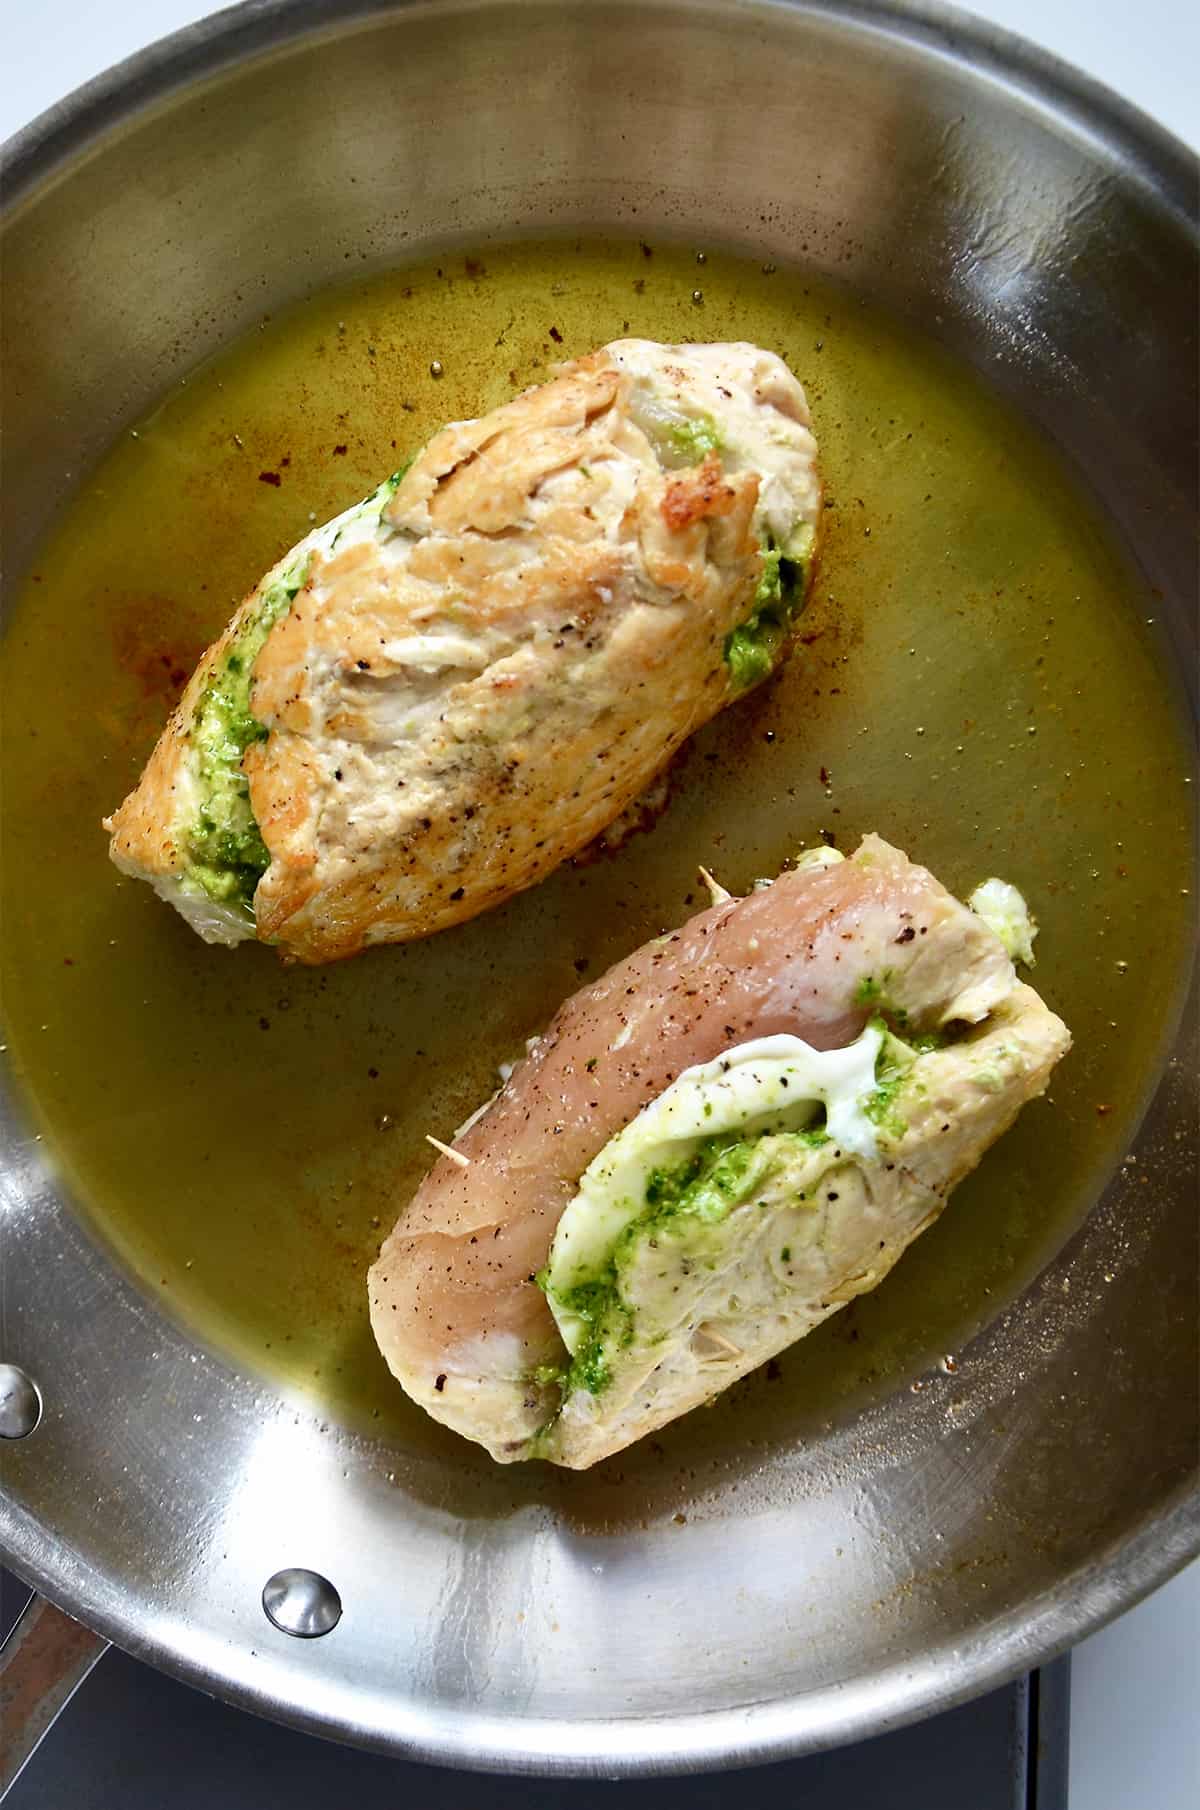 Pesto and mozzarella-stuffed chicken breasts are cooking in a skillet.